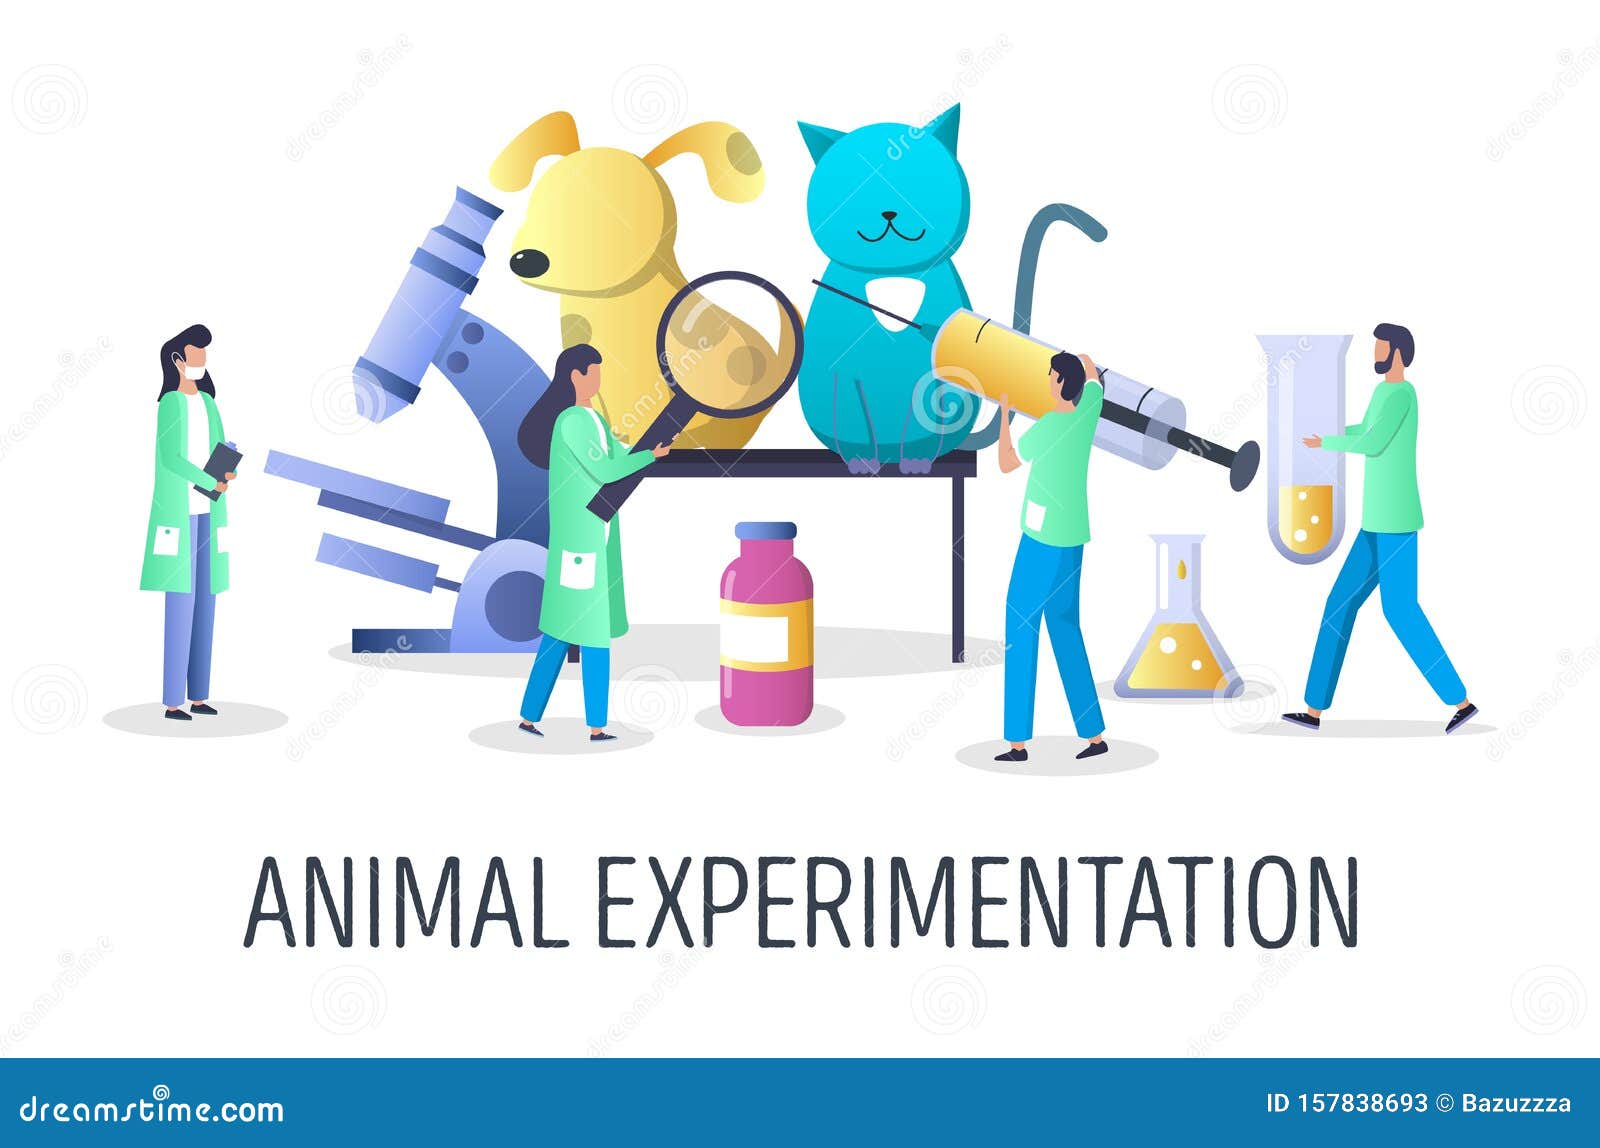 Animal Experimentation Vector Concept for Web Banner, Website Page ...